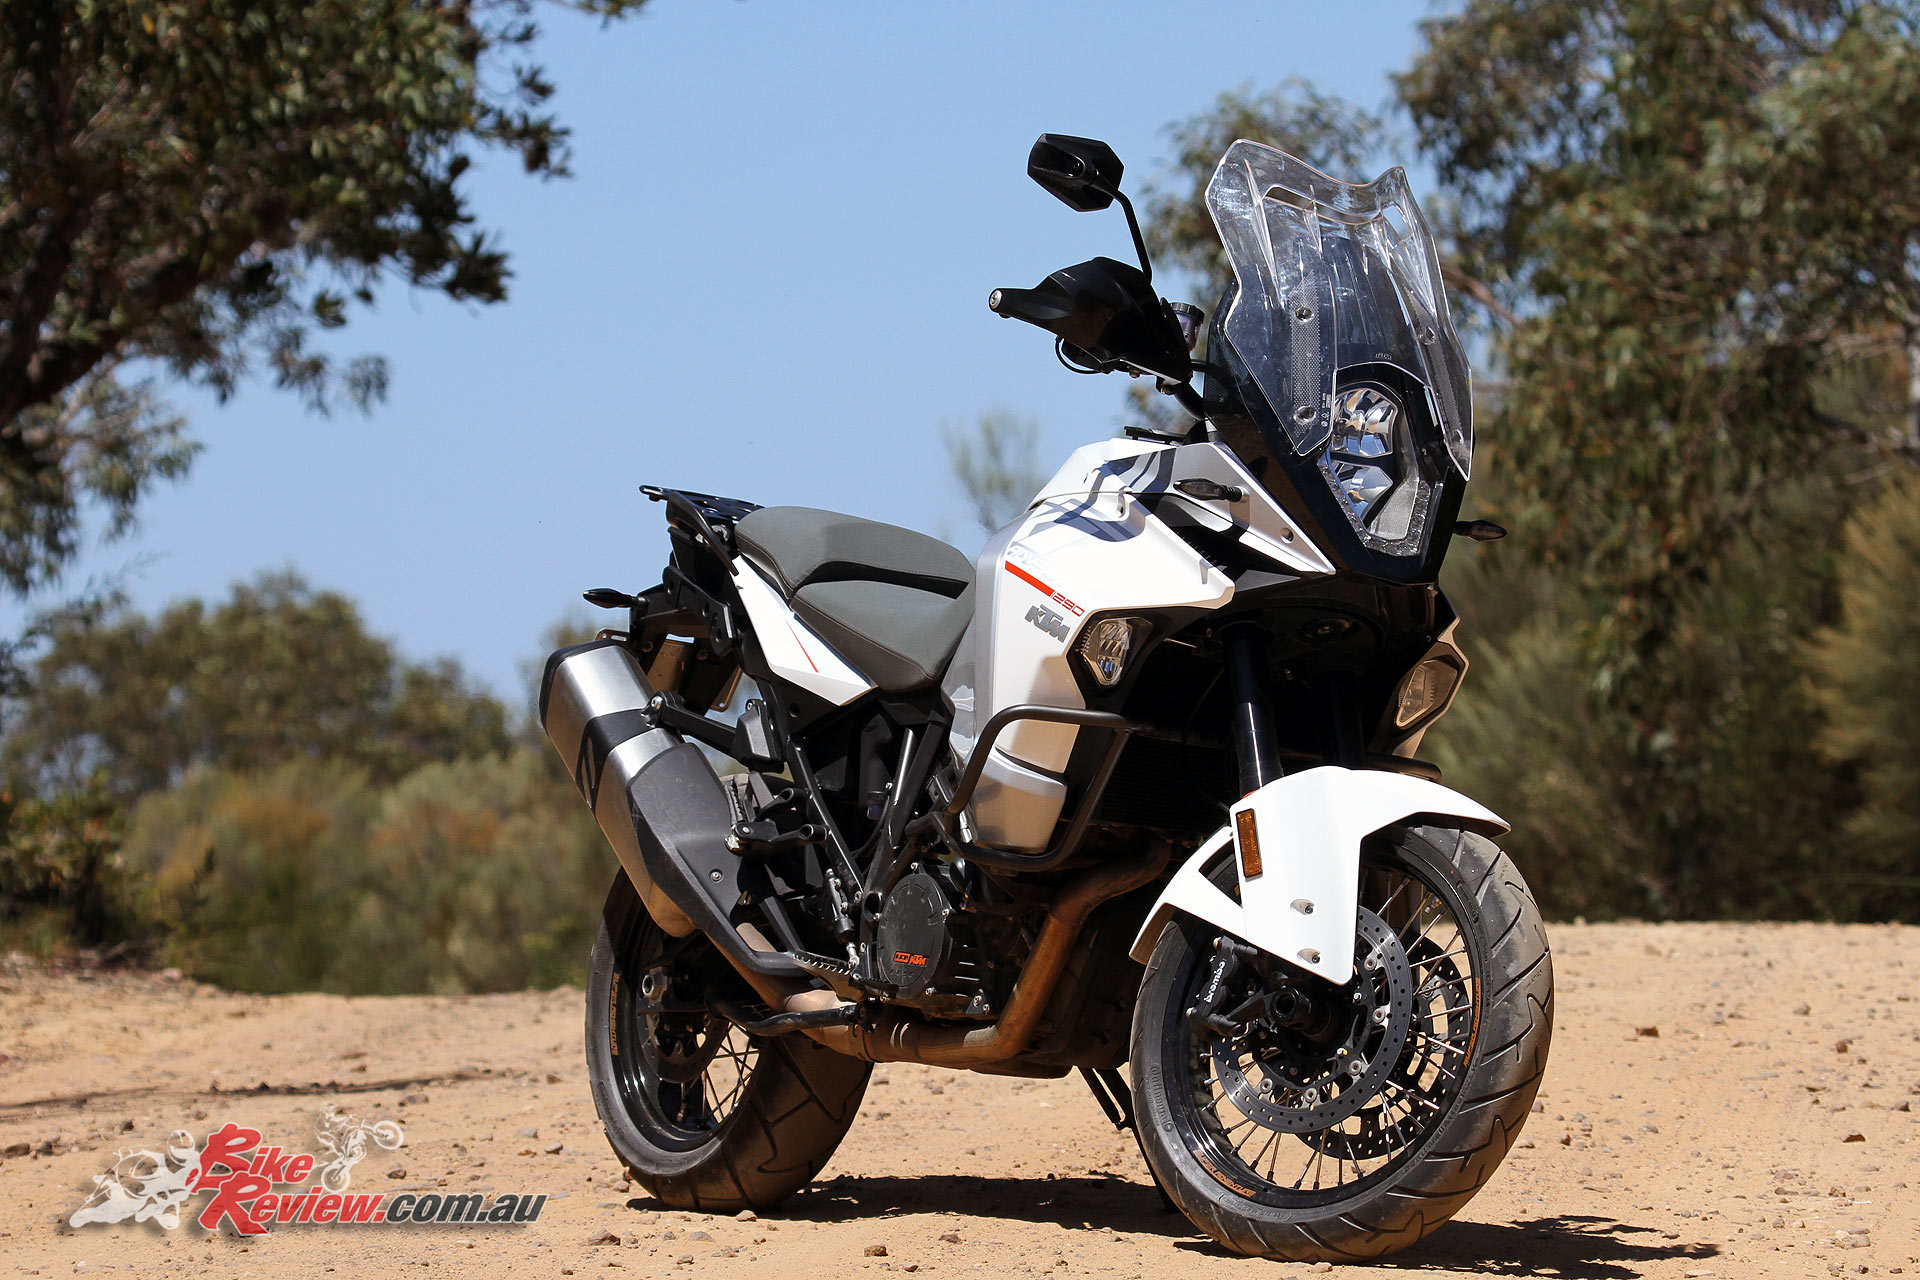 The KTM 1290 Super Adventure is an ultimate luxury high tech tourer with off road and on road creature comforts sure to get you around Australia in style and comfort.